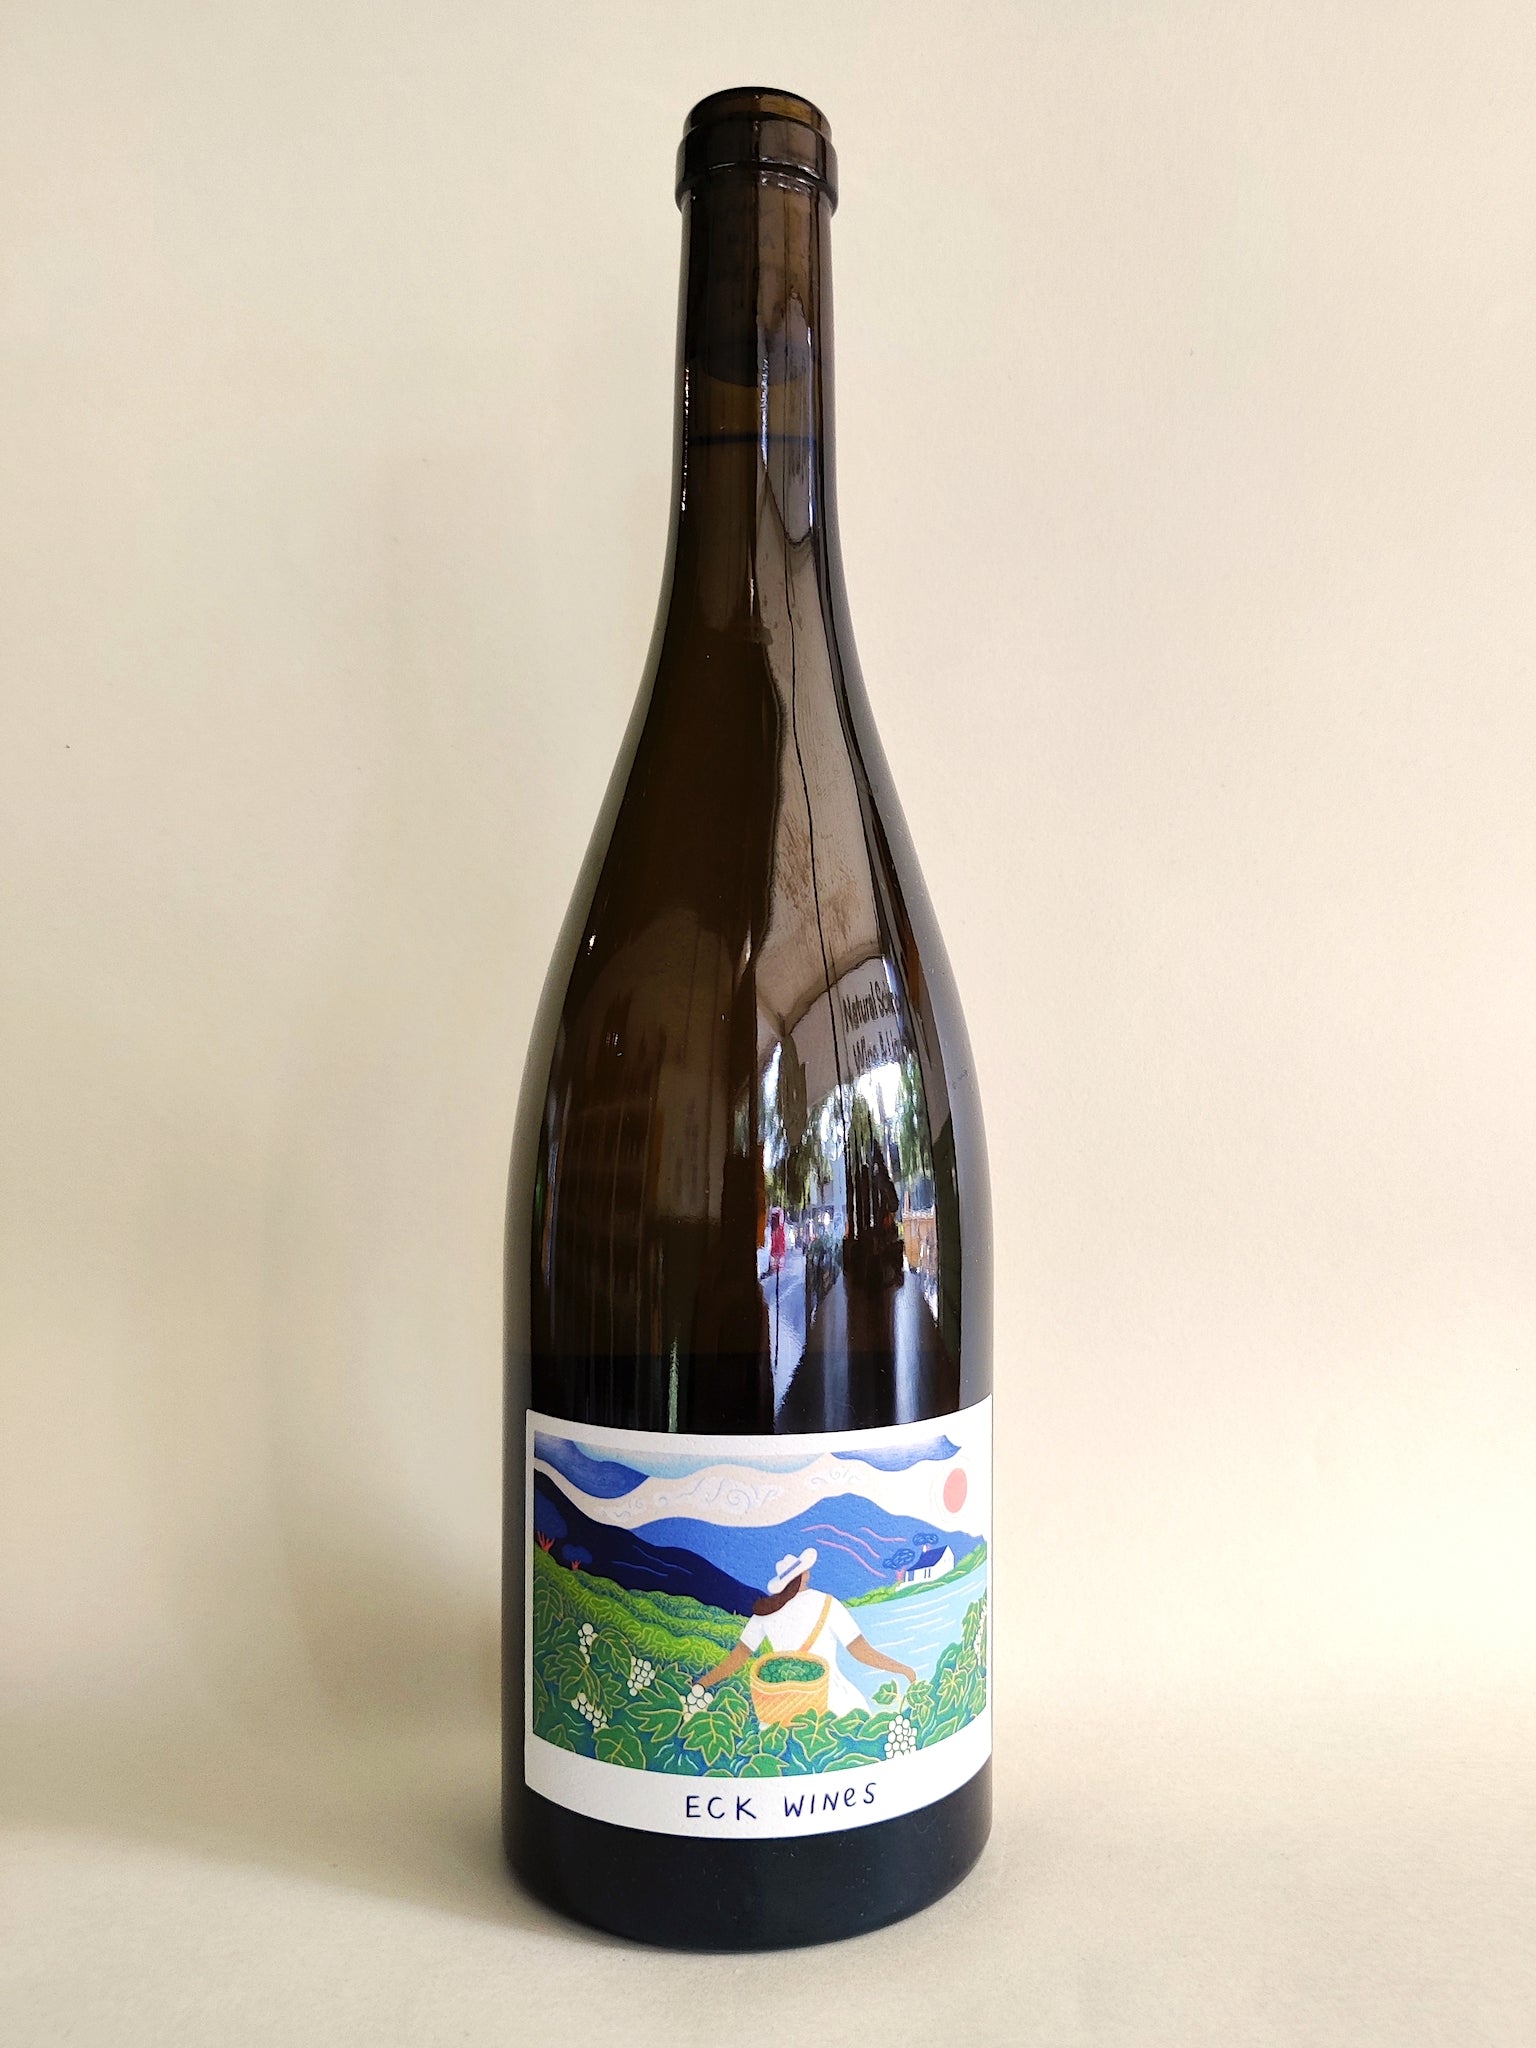 A bottle of ECK Wines Marsanne from Heathcote, Victoria.